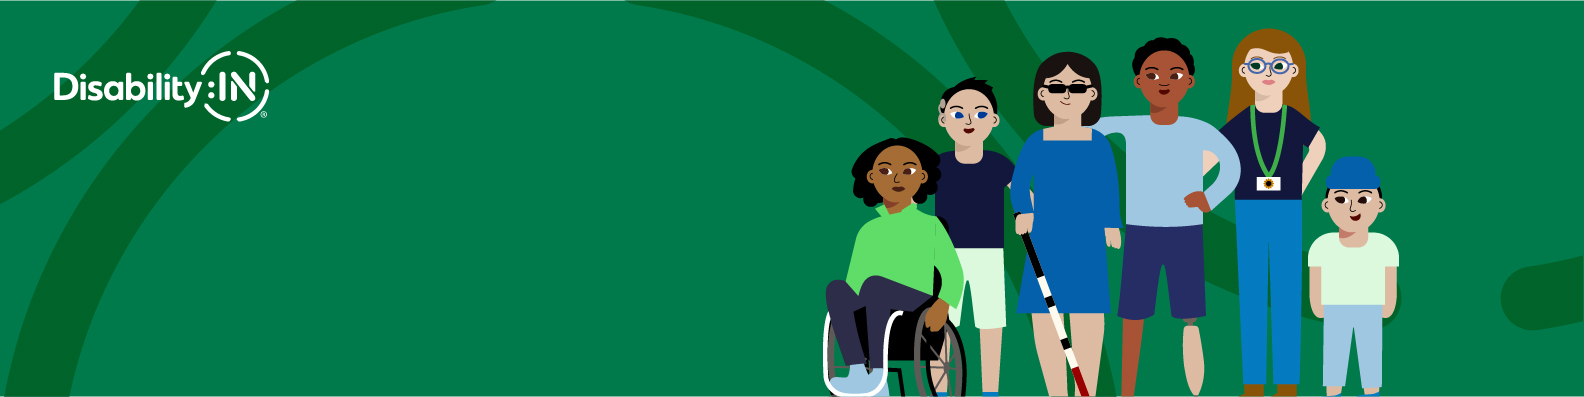 Illustration of six diverse individuals with disabilities gathered together against a green background. DisabilityIN logo is seen at top left.